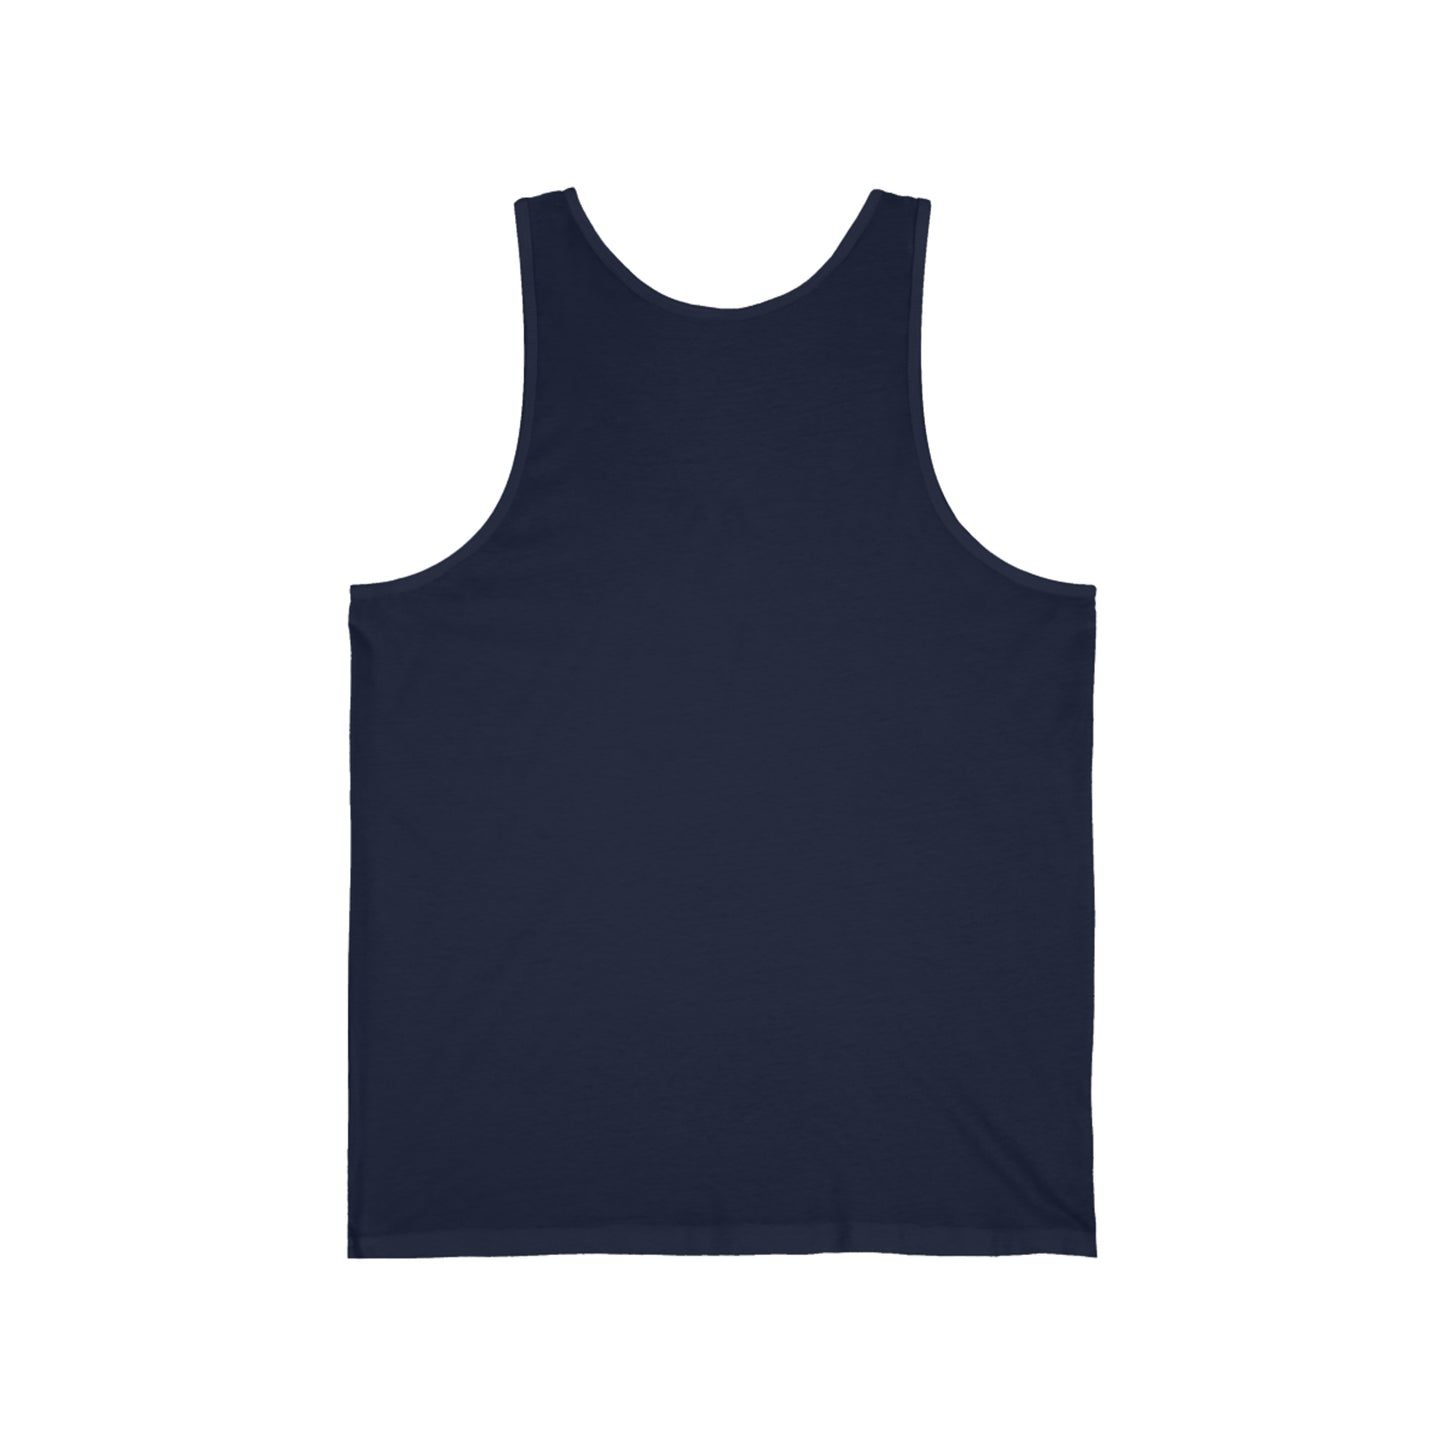 Japanese Roots Design 2: Tank Top